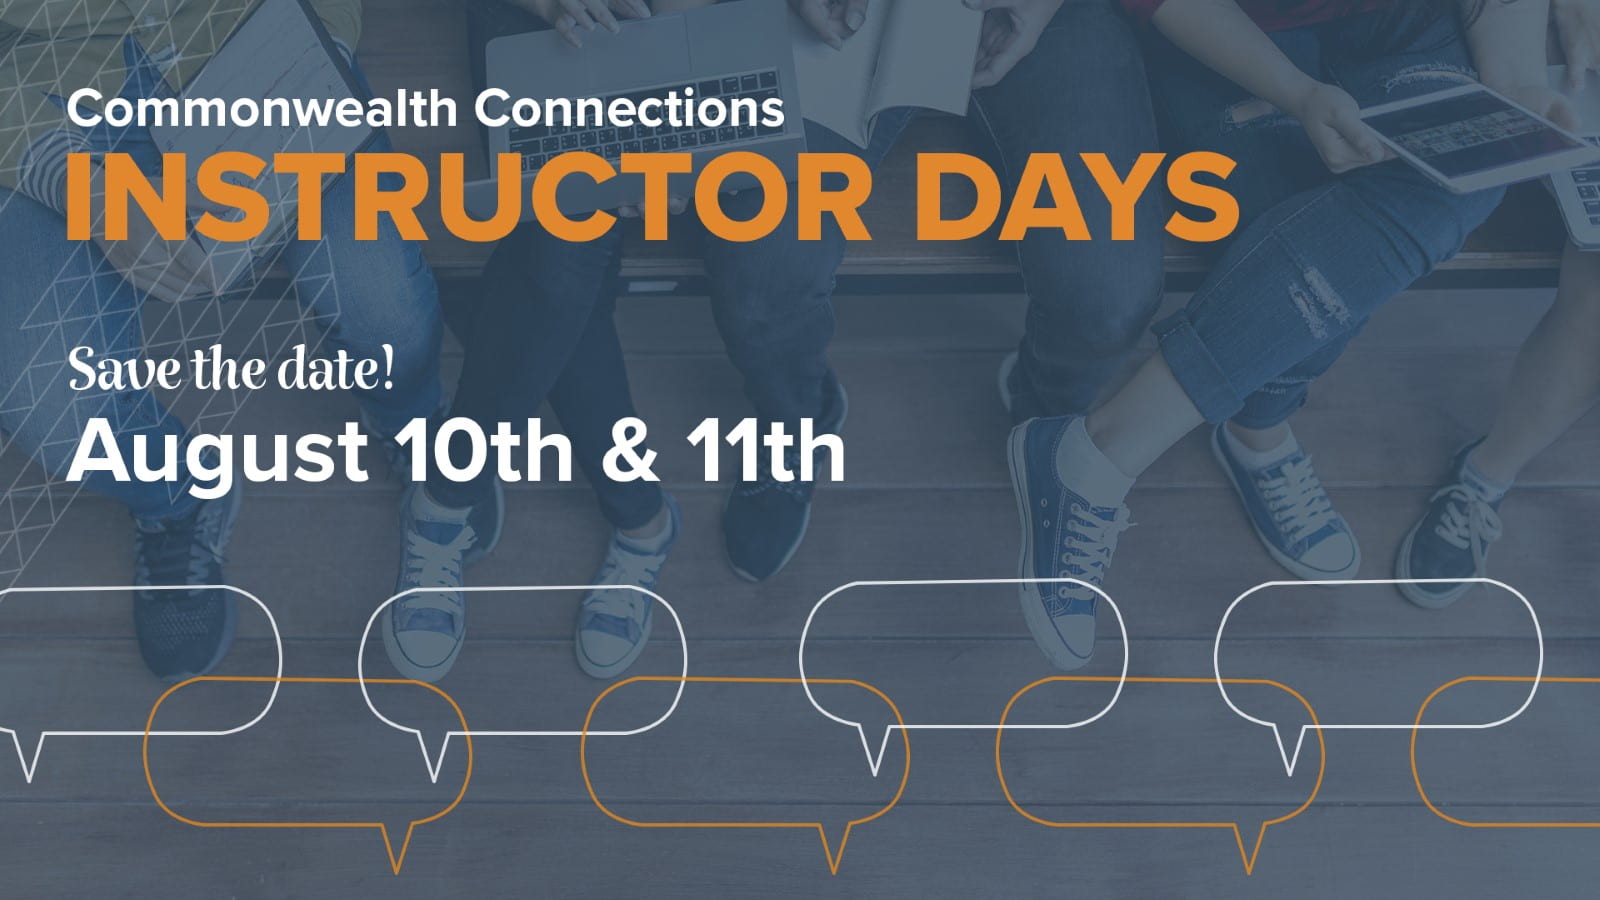 Commonwealth connections instructor days advertising flyer August 10 and 11